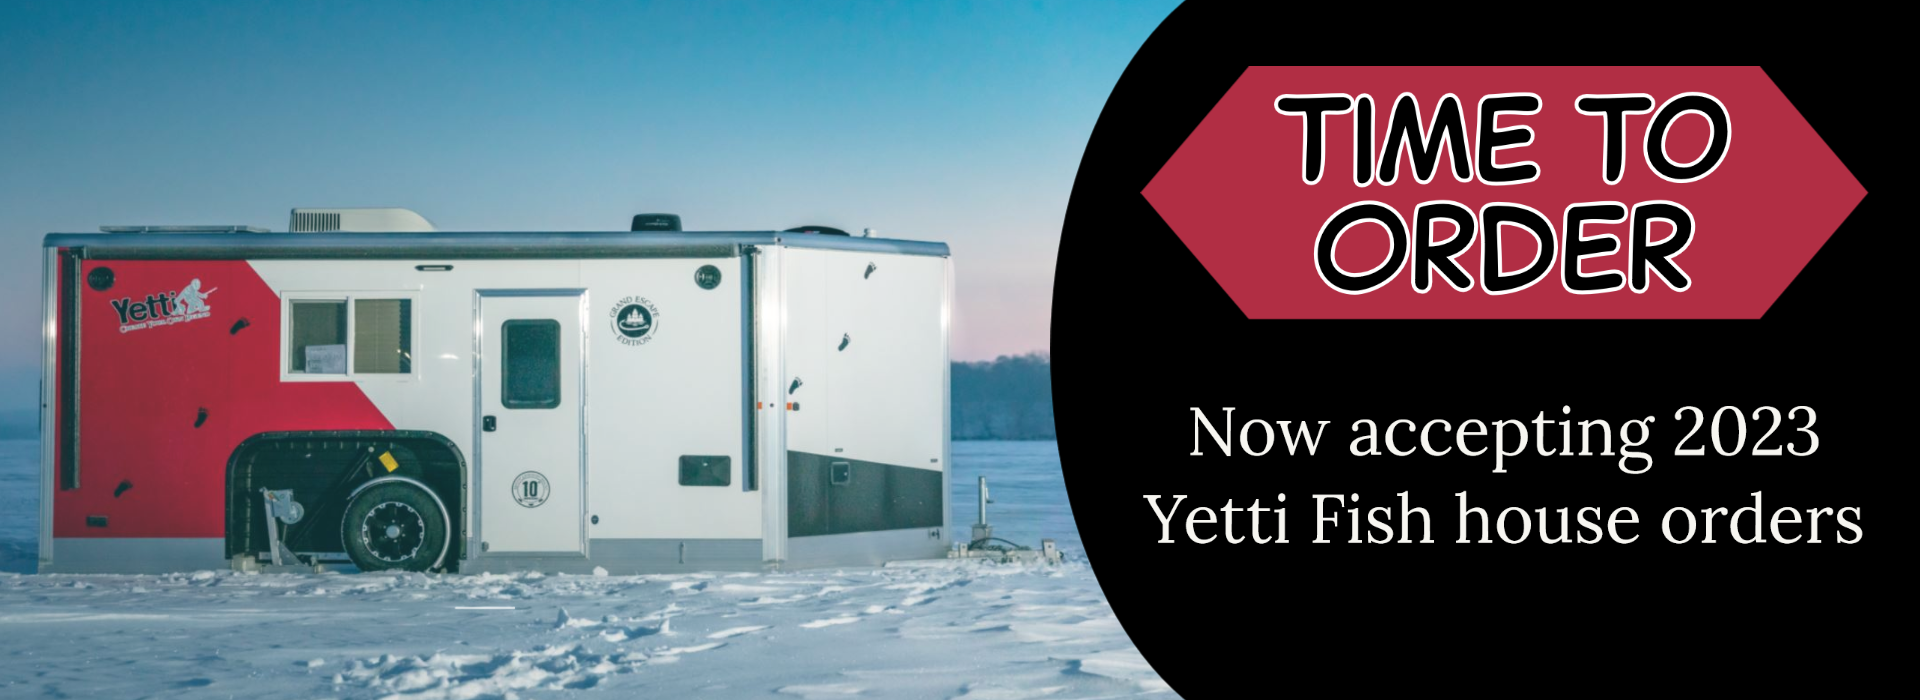 Yetti Time To Order